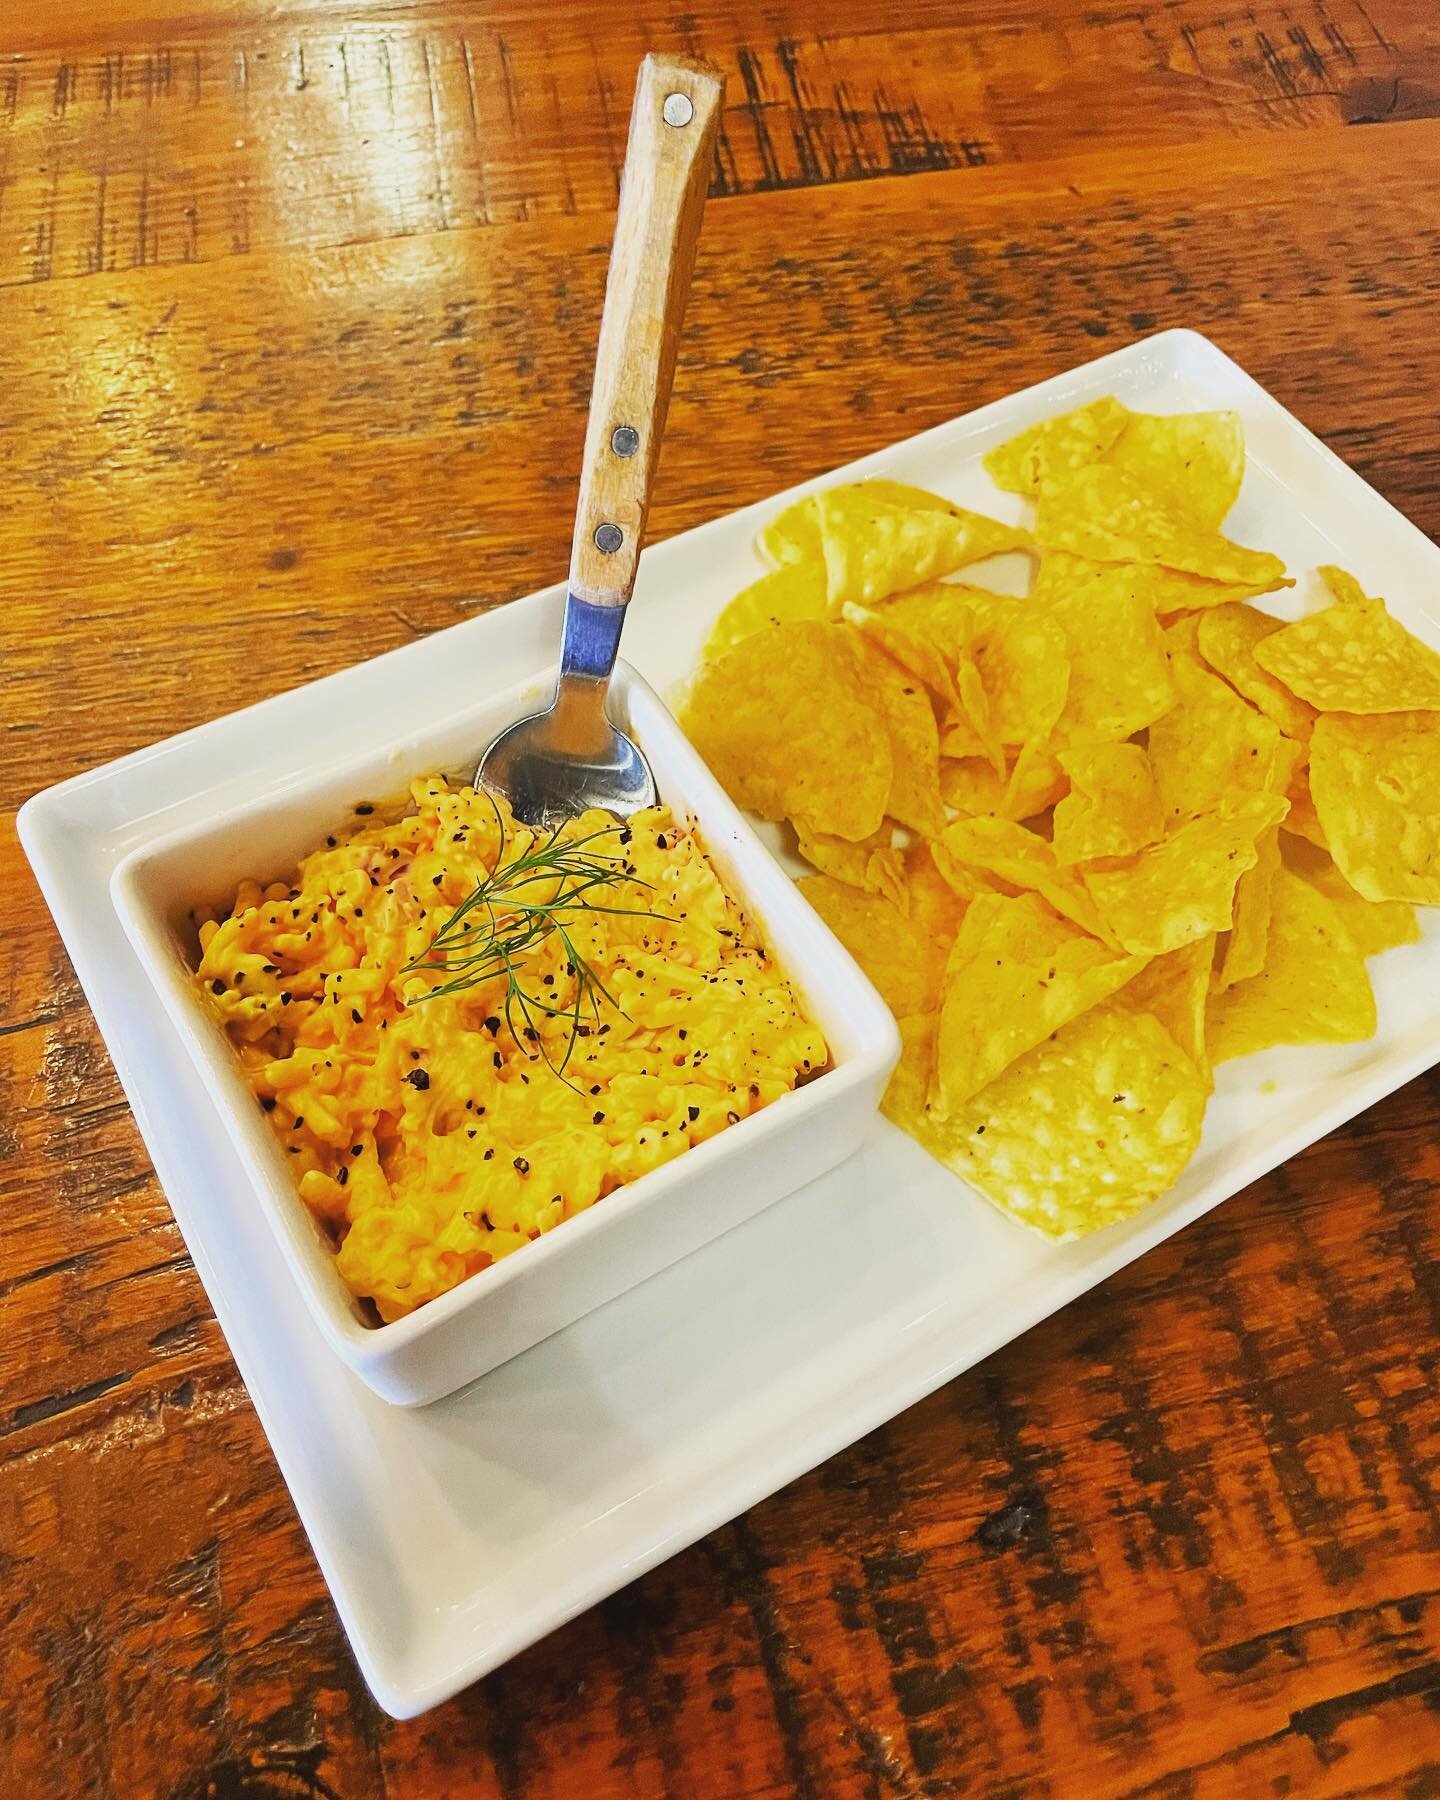 We got some new spreads for ya! This one is Kari&rsquo;s famous Nashville-style Pimento Cheese. 

And we also have a delicious Smoked Salmon spread. 😋